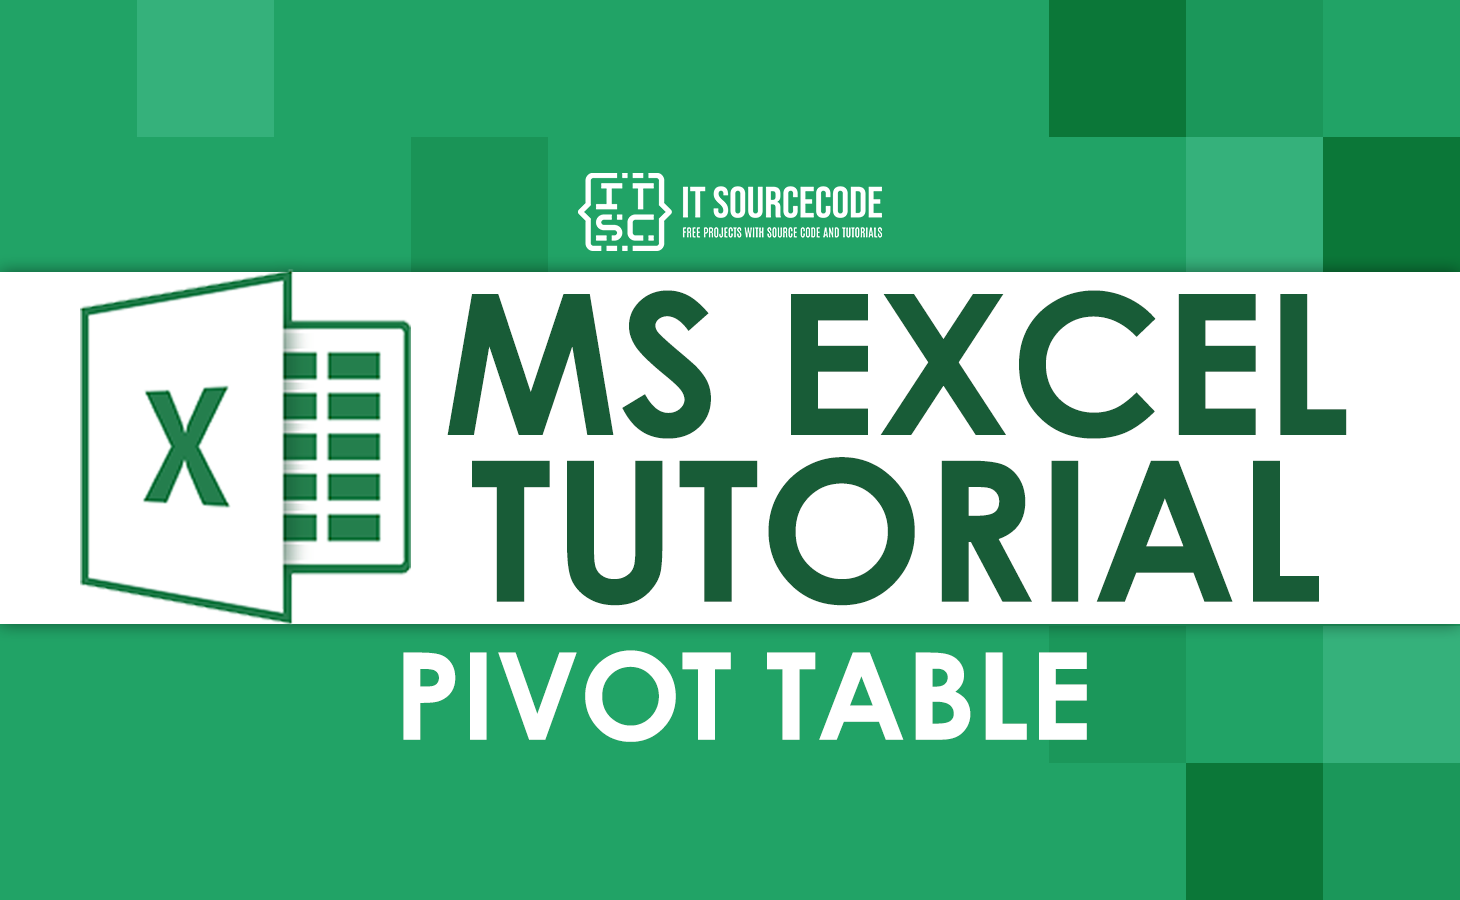 Pivot table in Excel